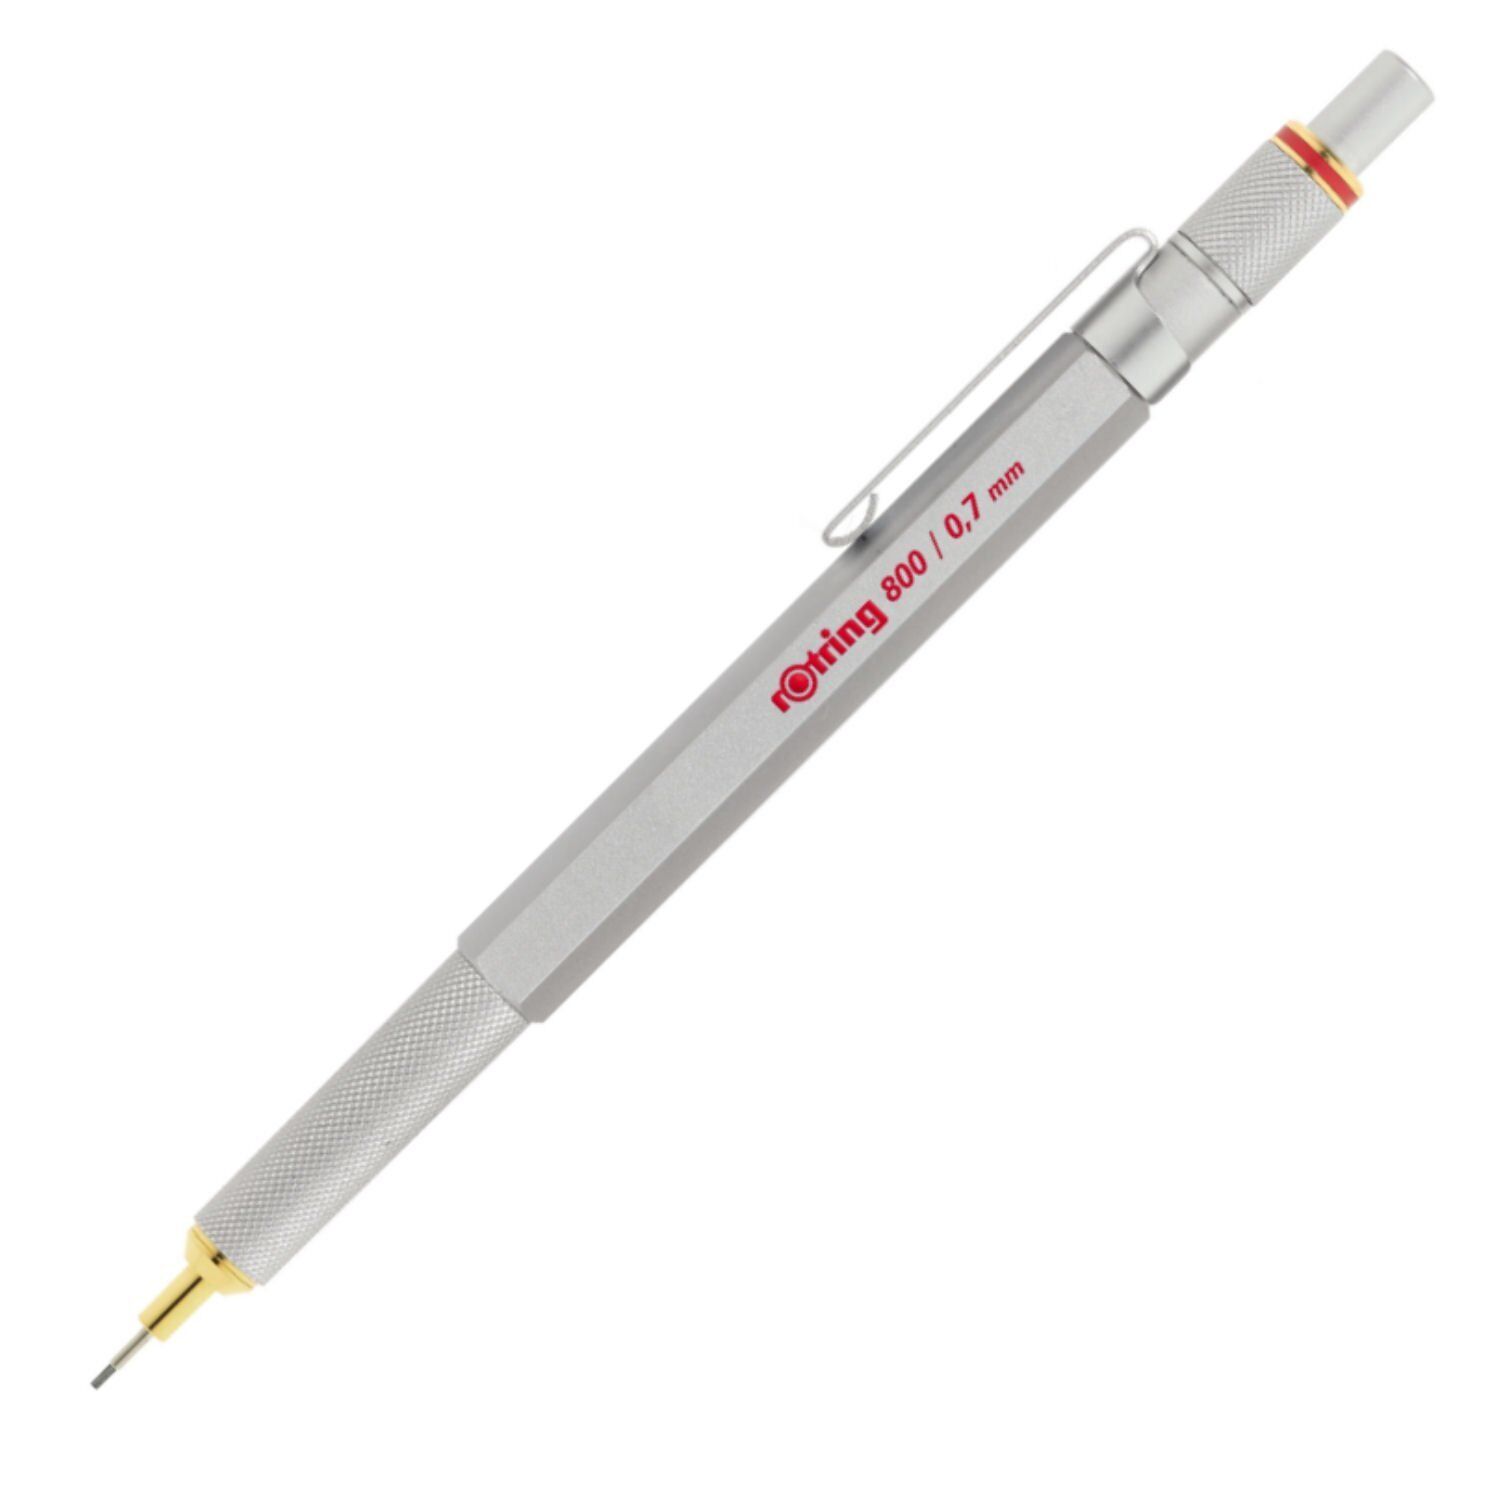 Rotring 800 Series - 0.7mm Pencil - Silver - 1854234 - Brand New Pencil in Box